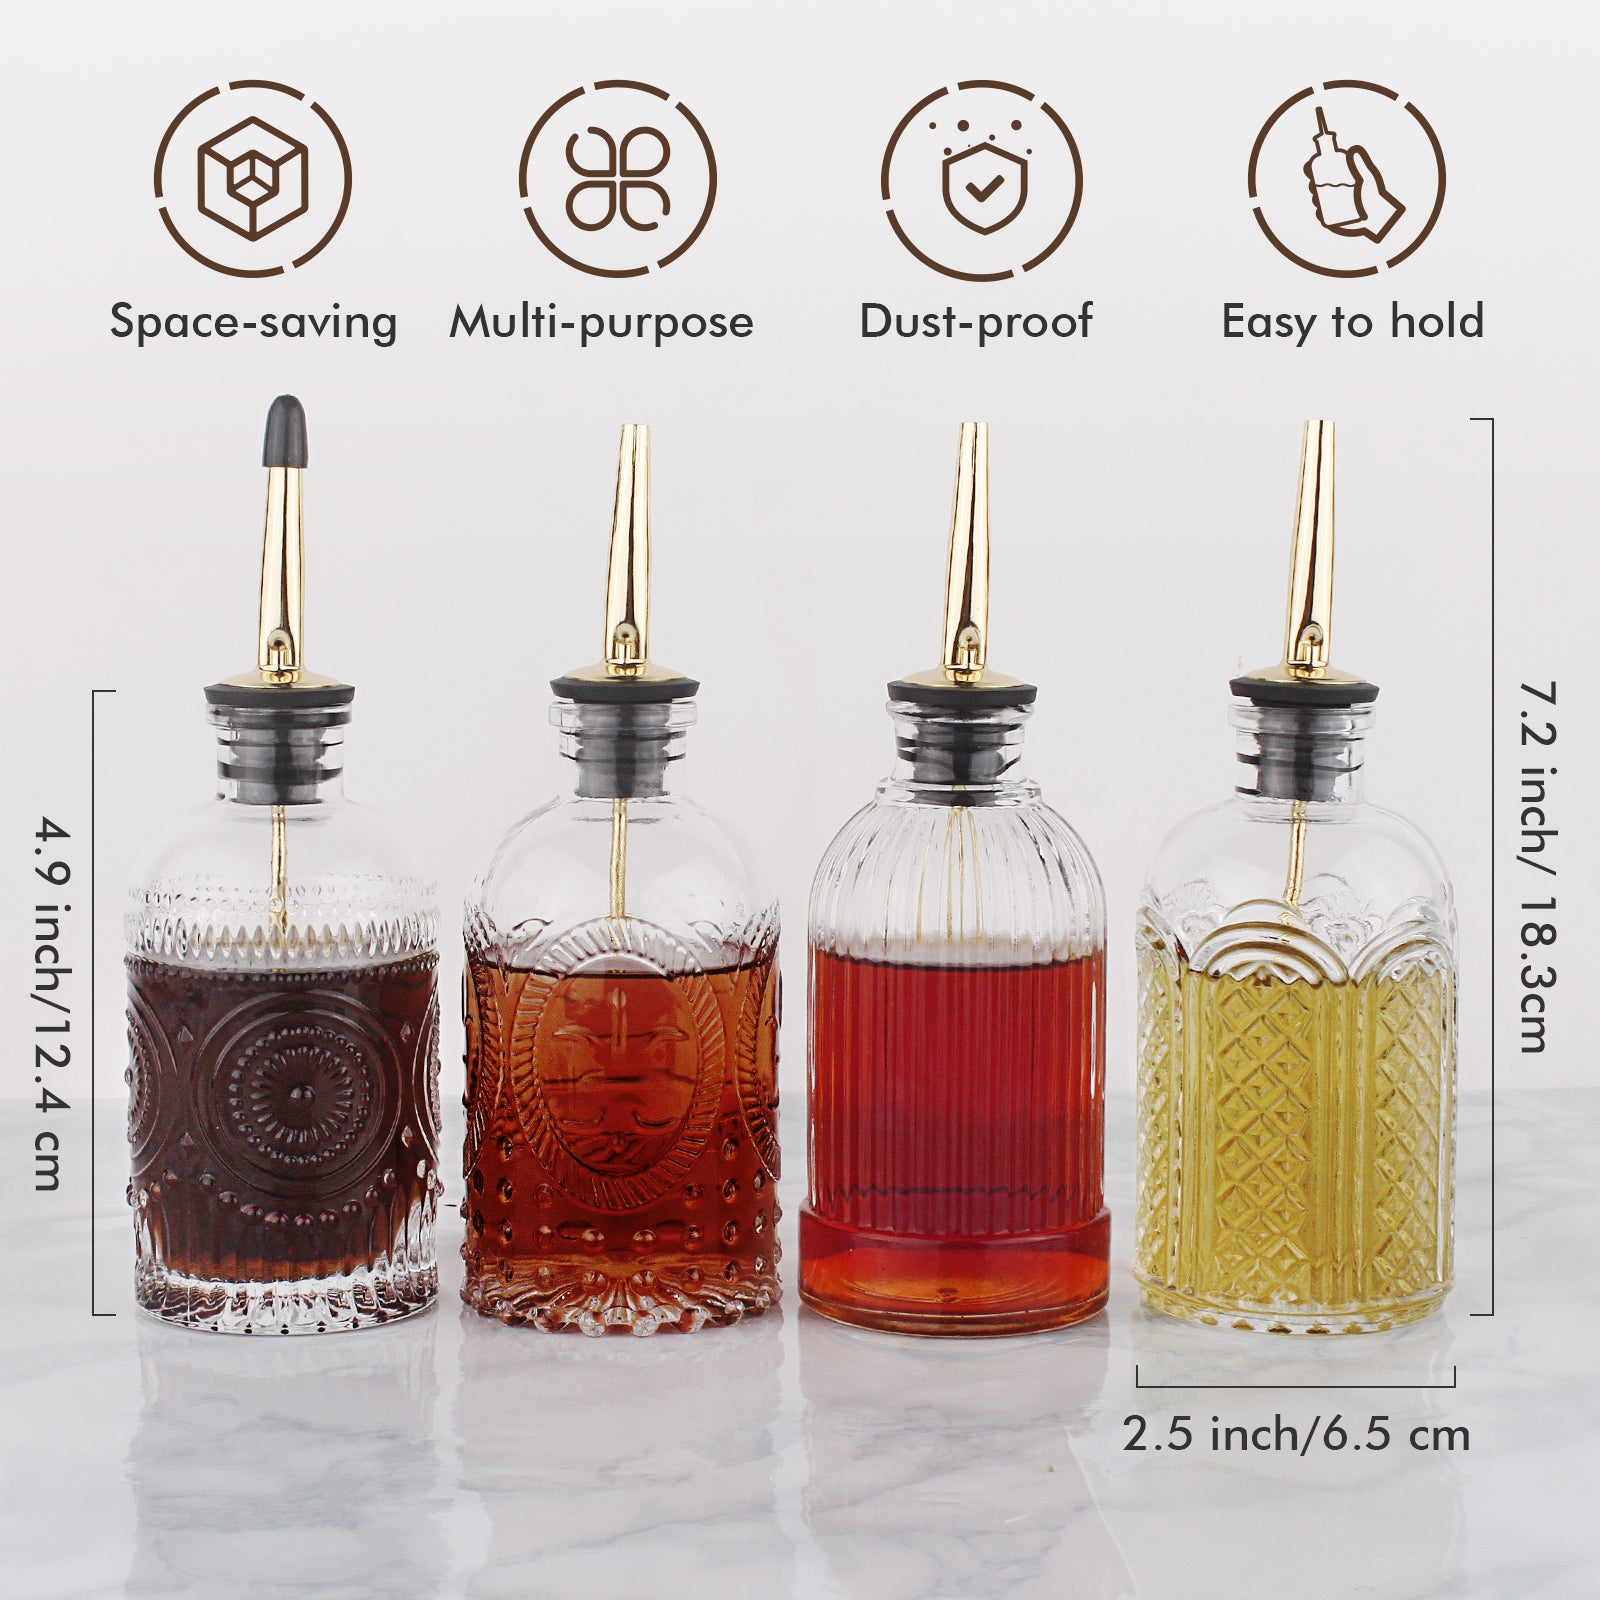 VOBAGA Coffee Syrup Dispenser 4 Pack, 7oz Glass Syrup Bottle for Honey, Coffee Bar Accessories with Stainless Steel Pour Spout